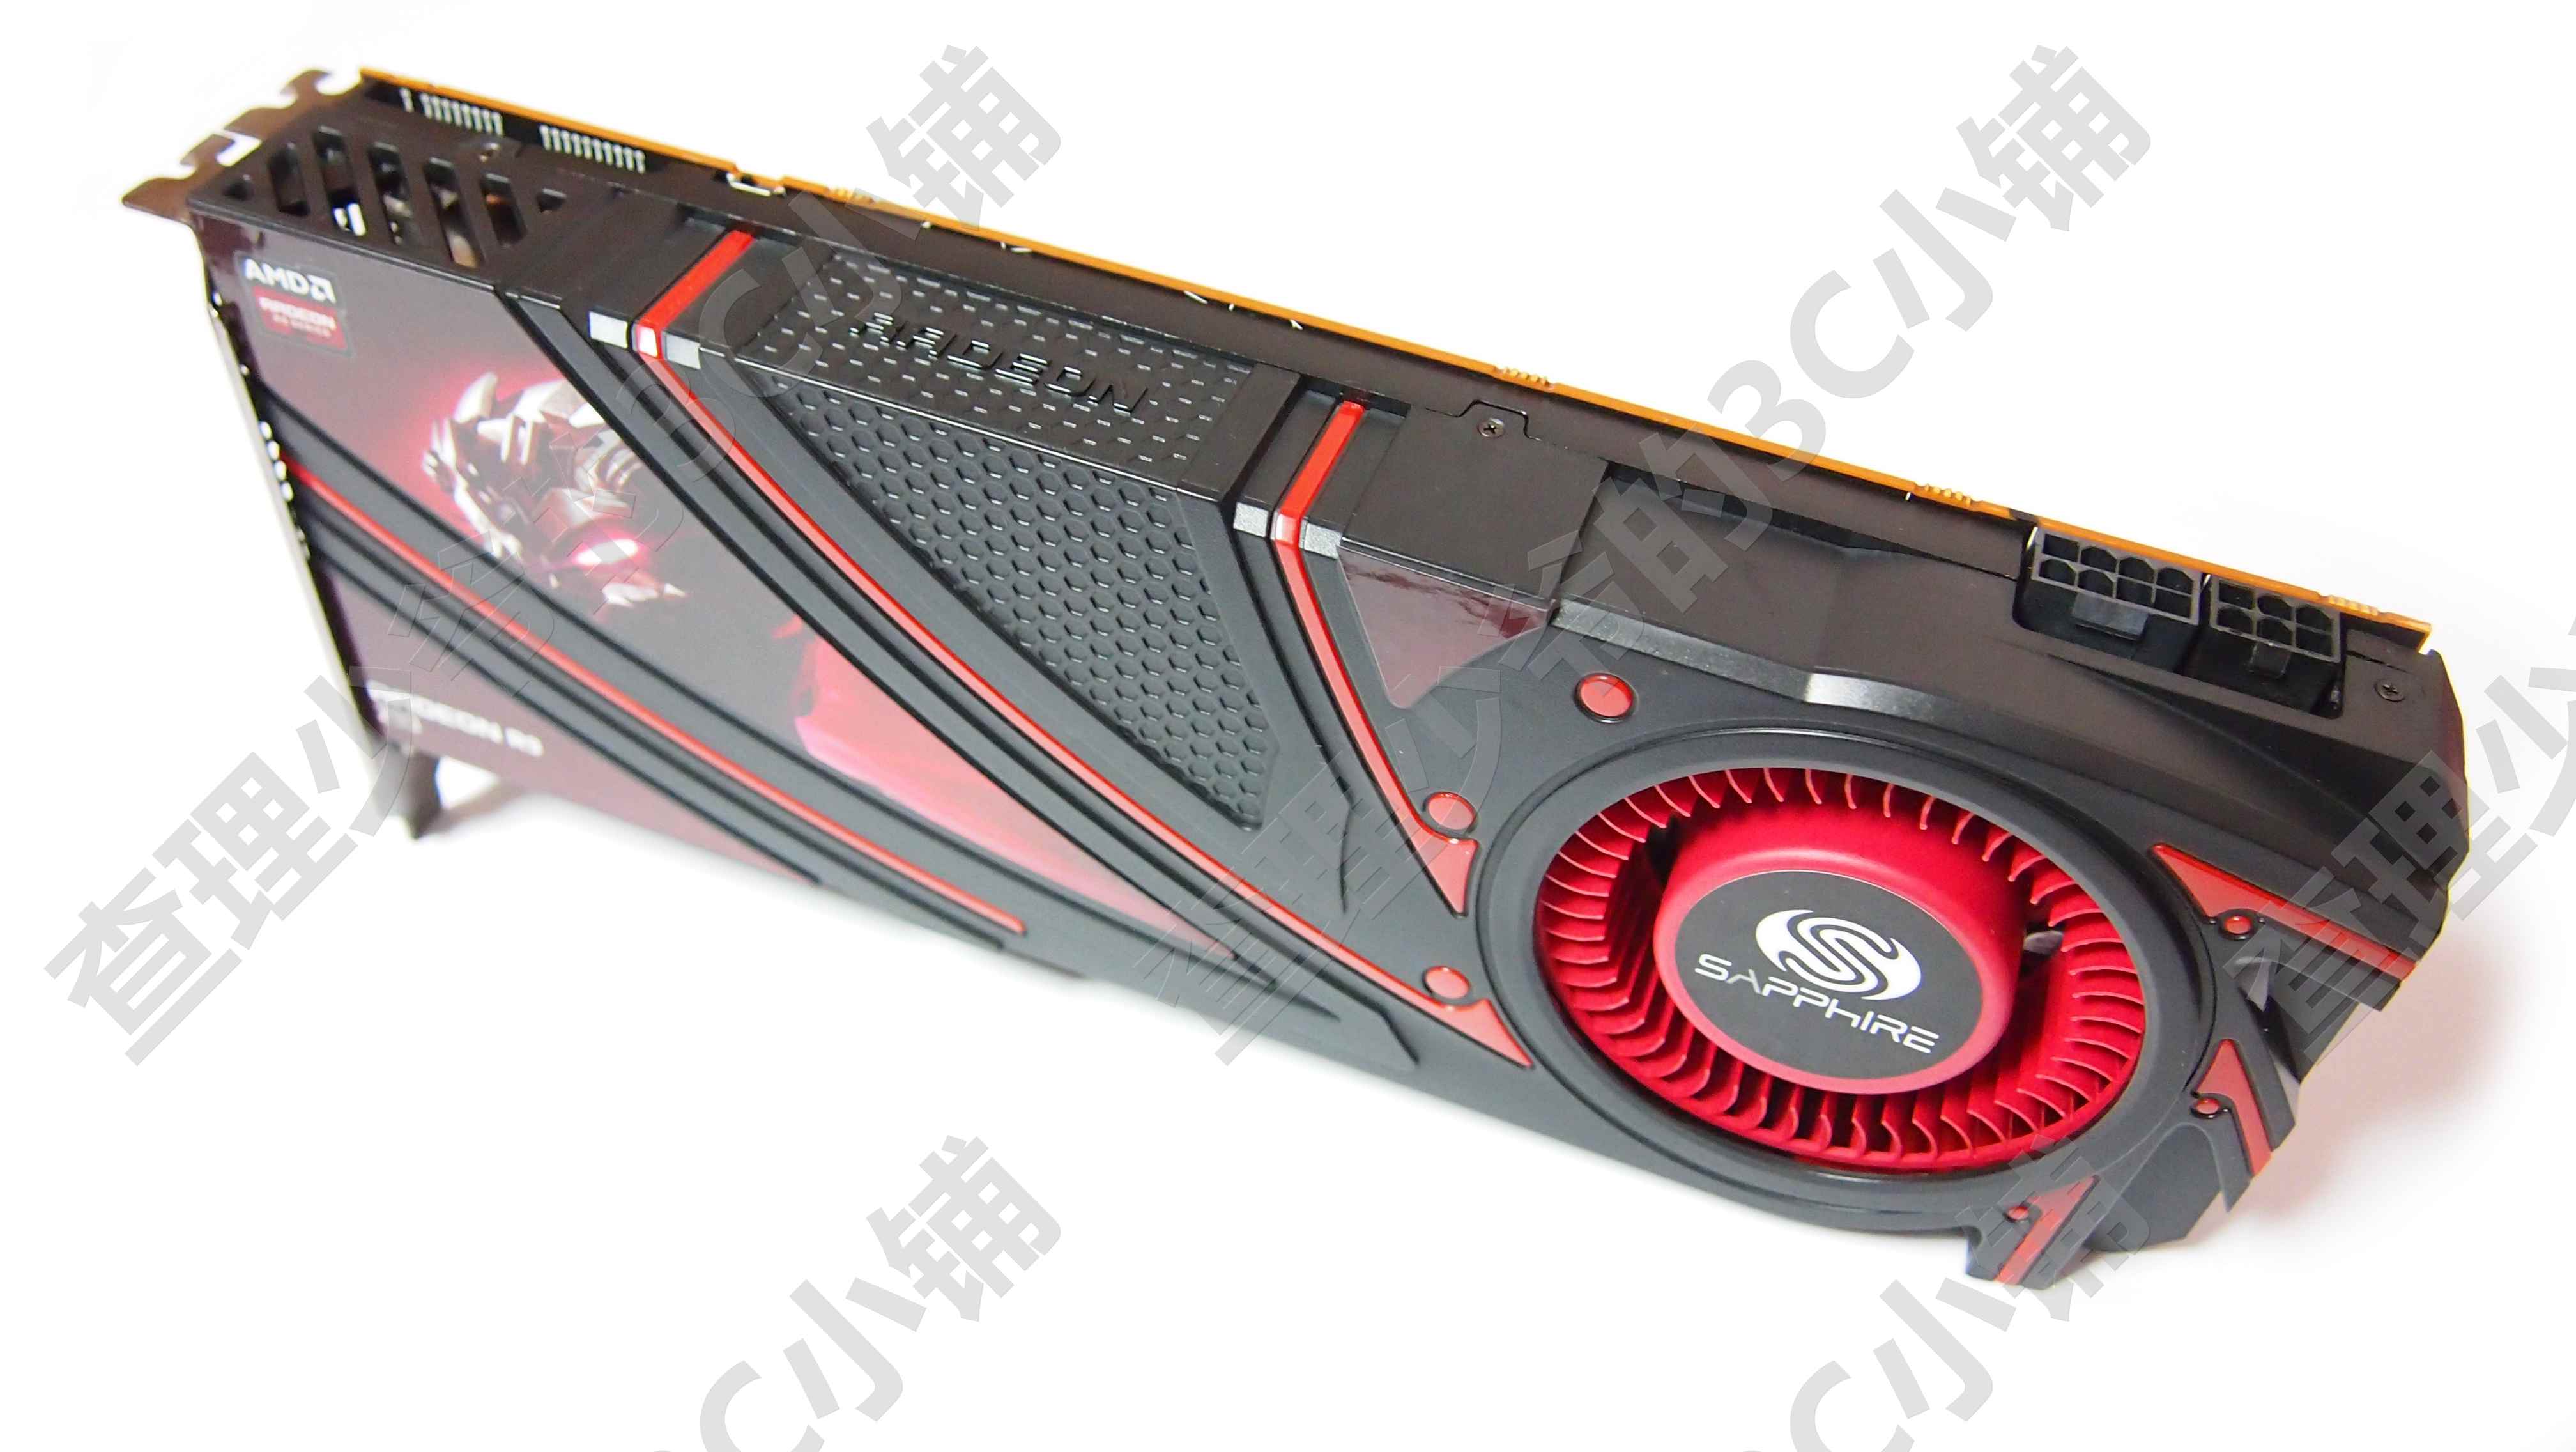 Sapphire Radeon R9 290 pictured and 'tested' | VideoCardz.com